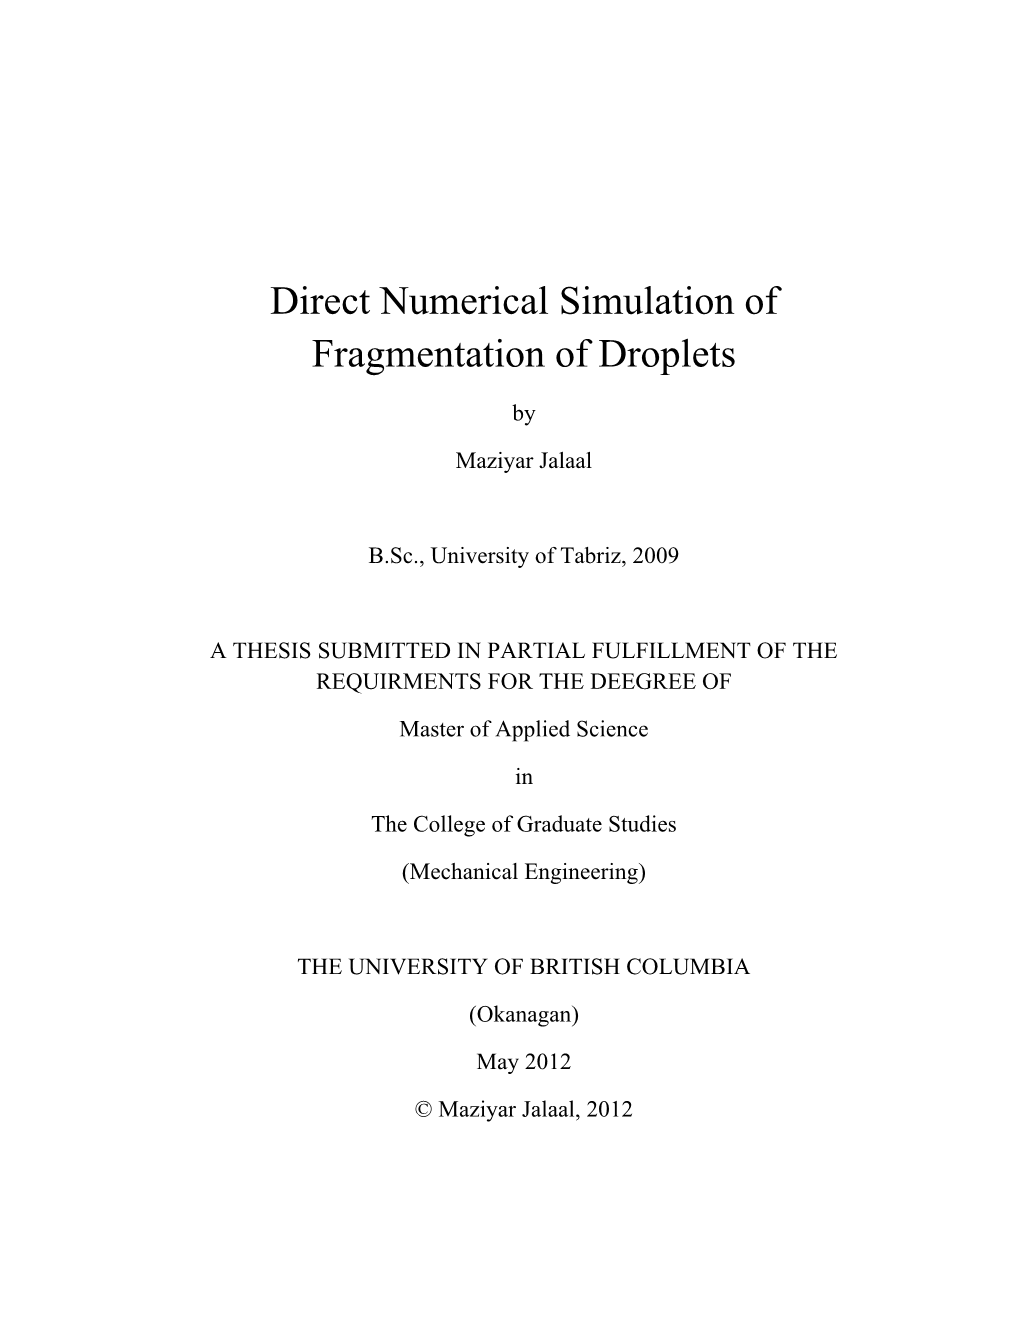 Direct Numerical Simulation of Fragmentation of Droplets